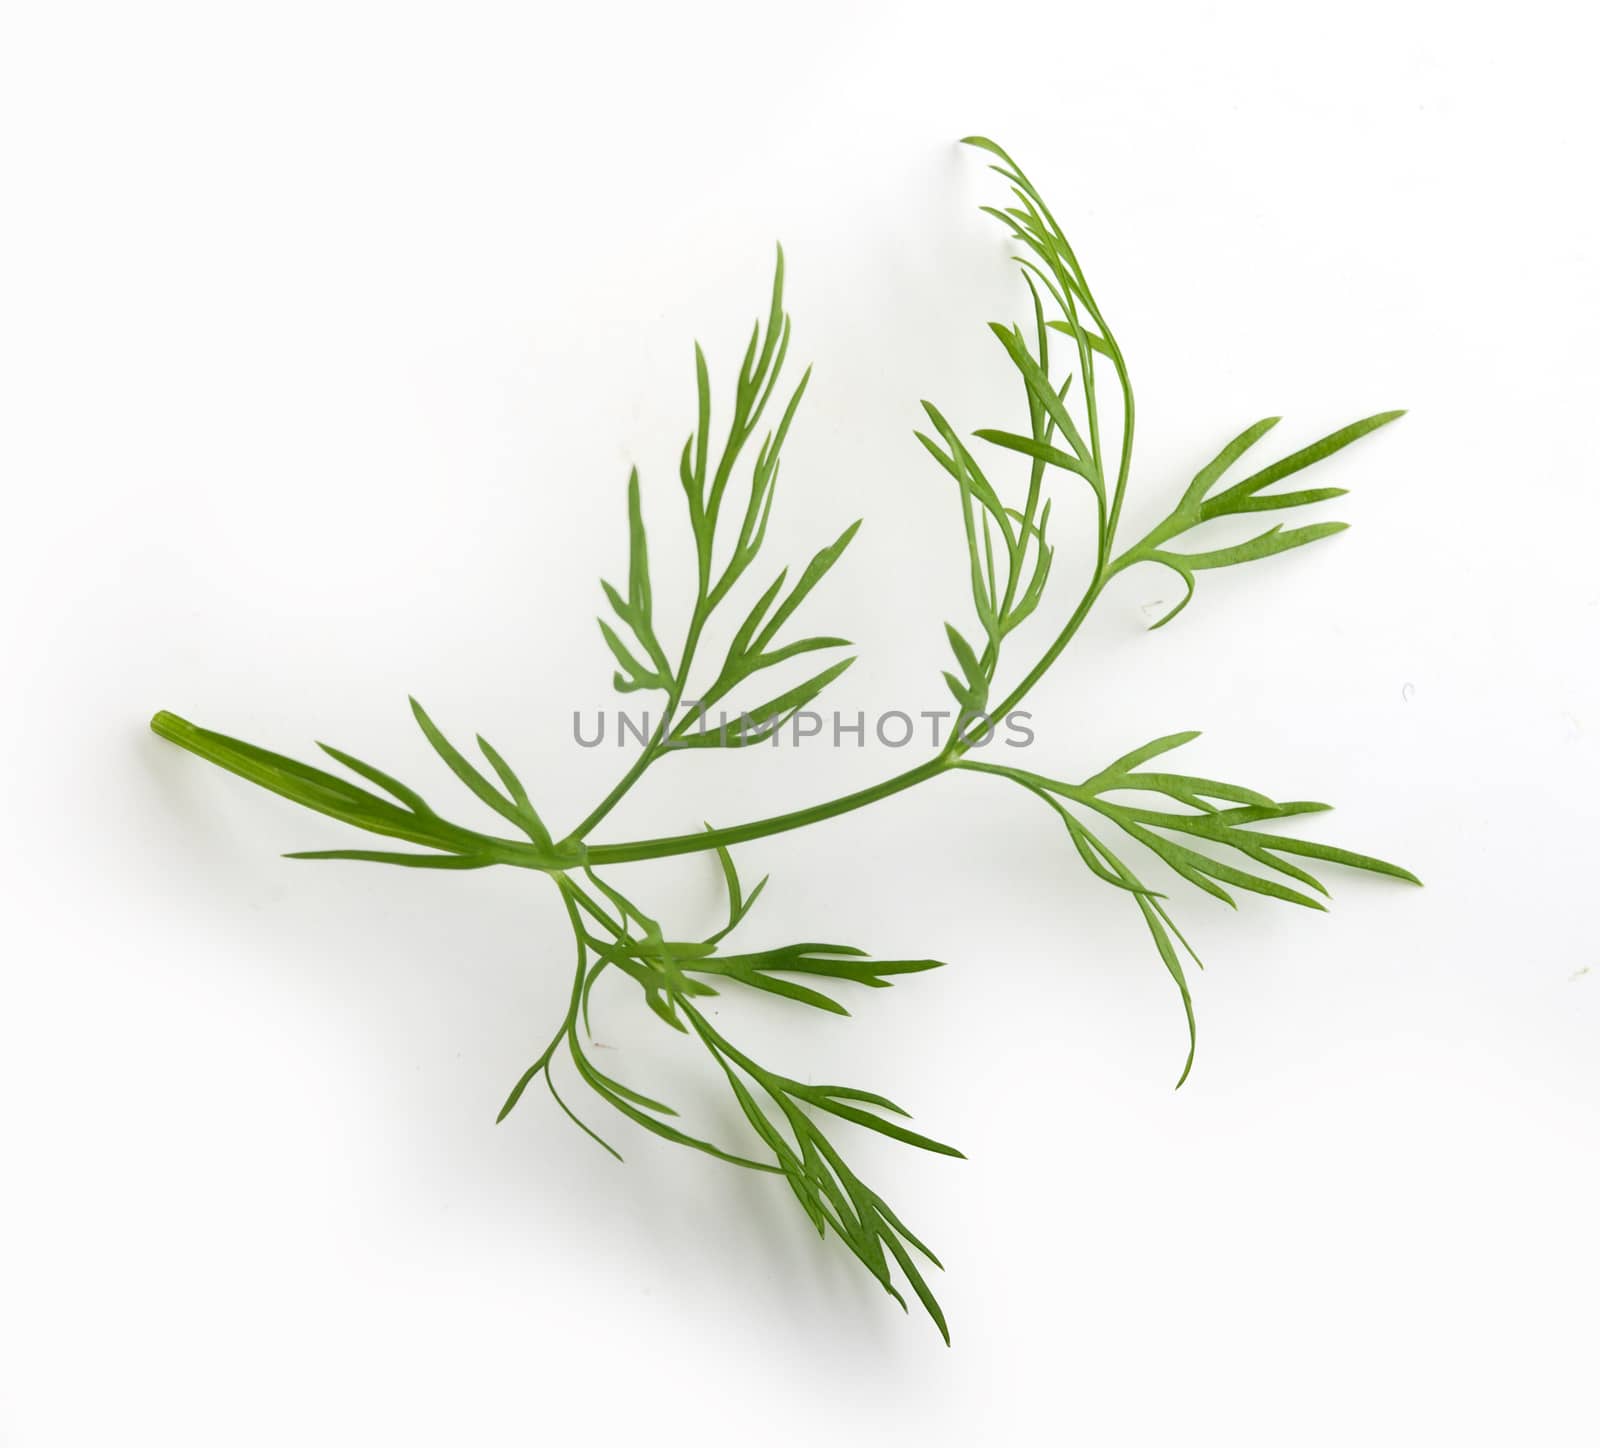 Sprig of green dill by Angorius